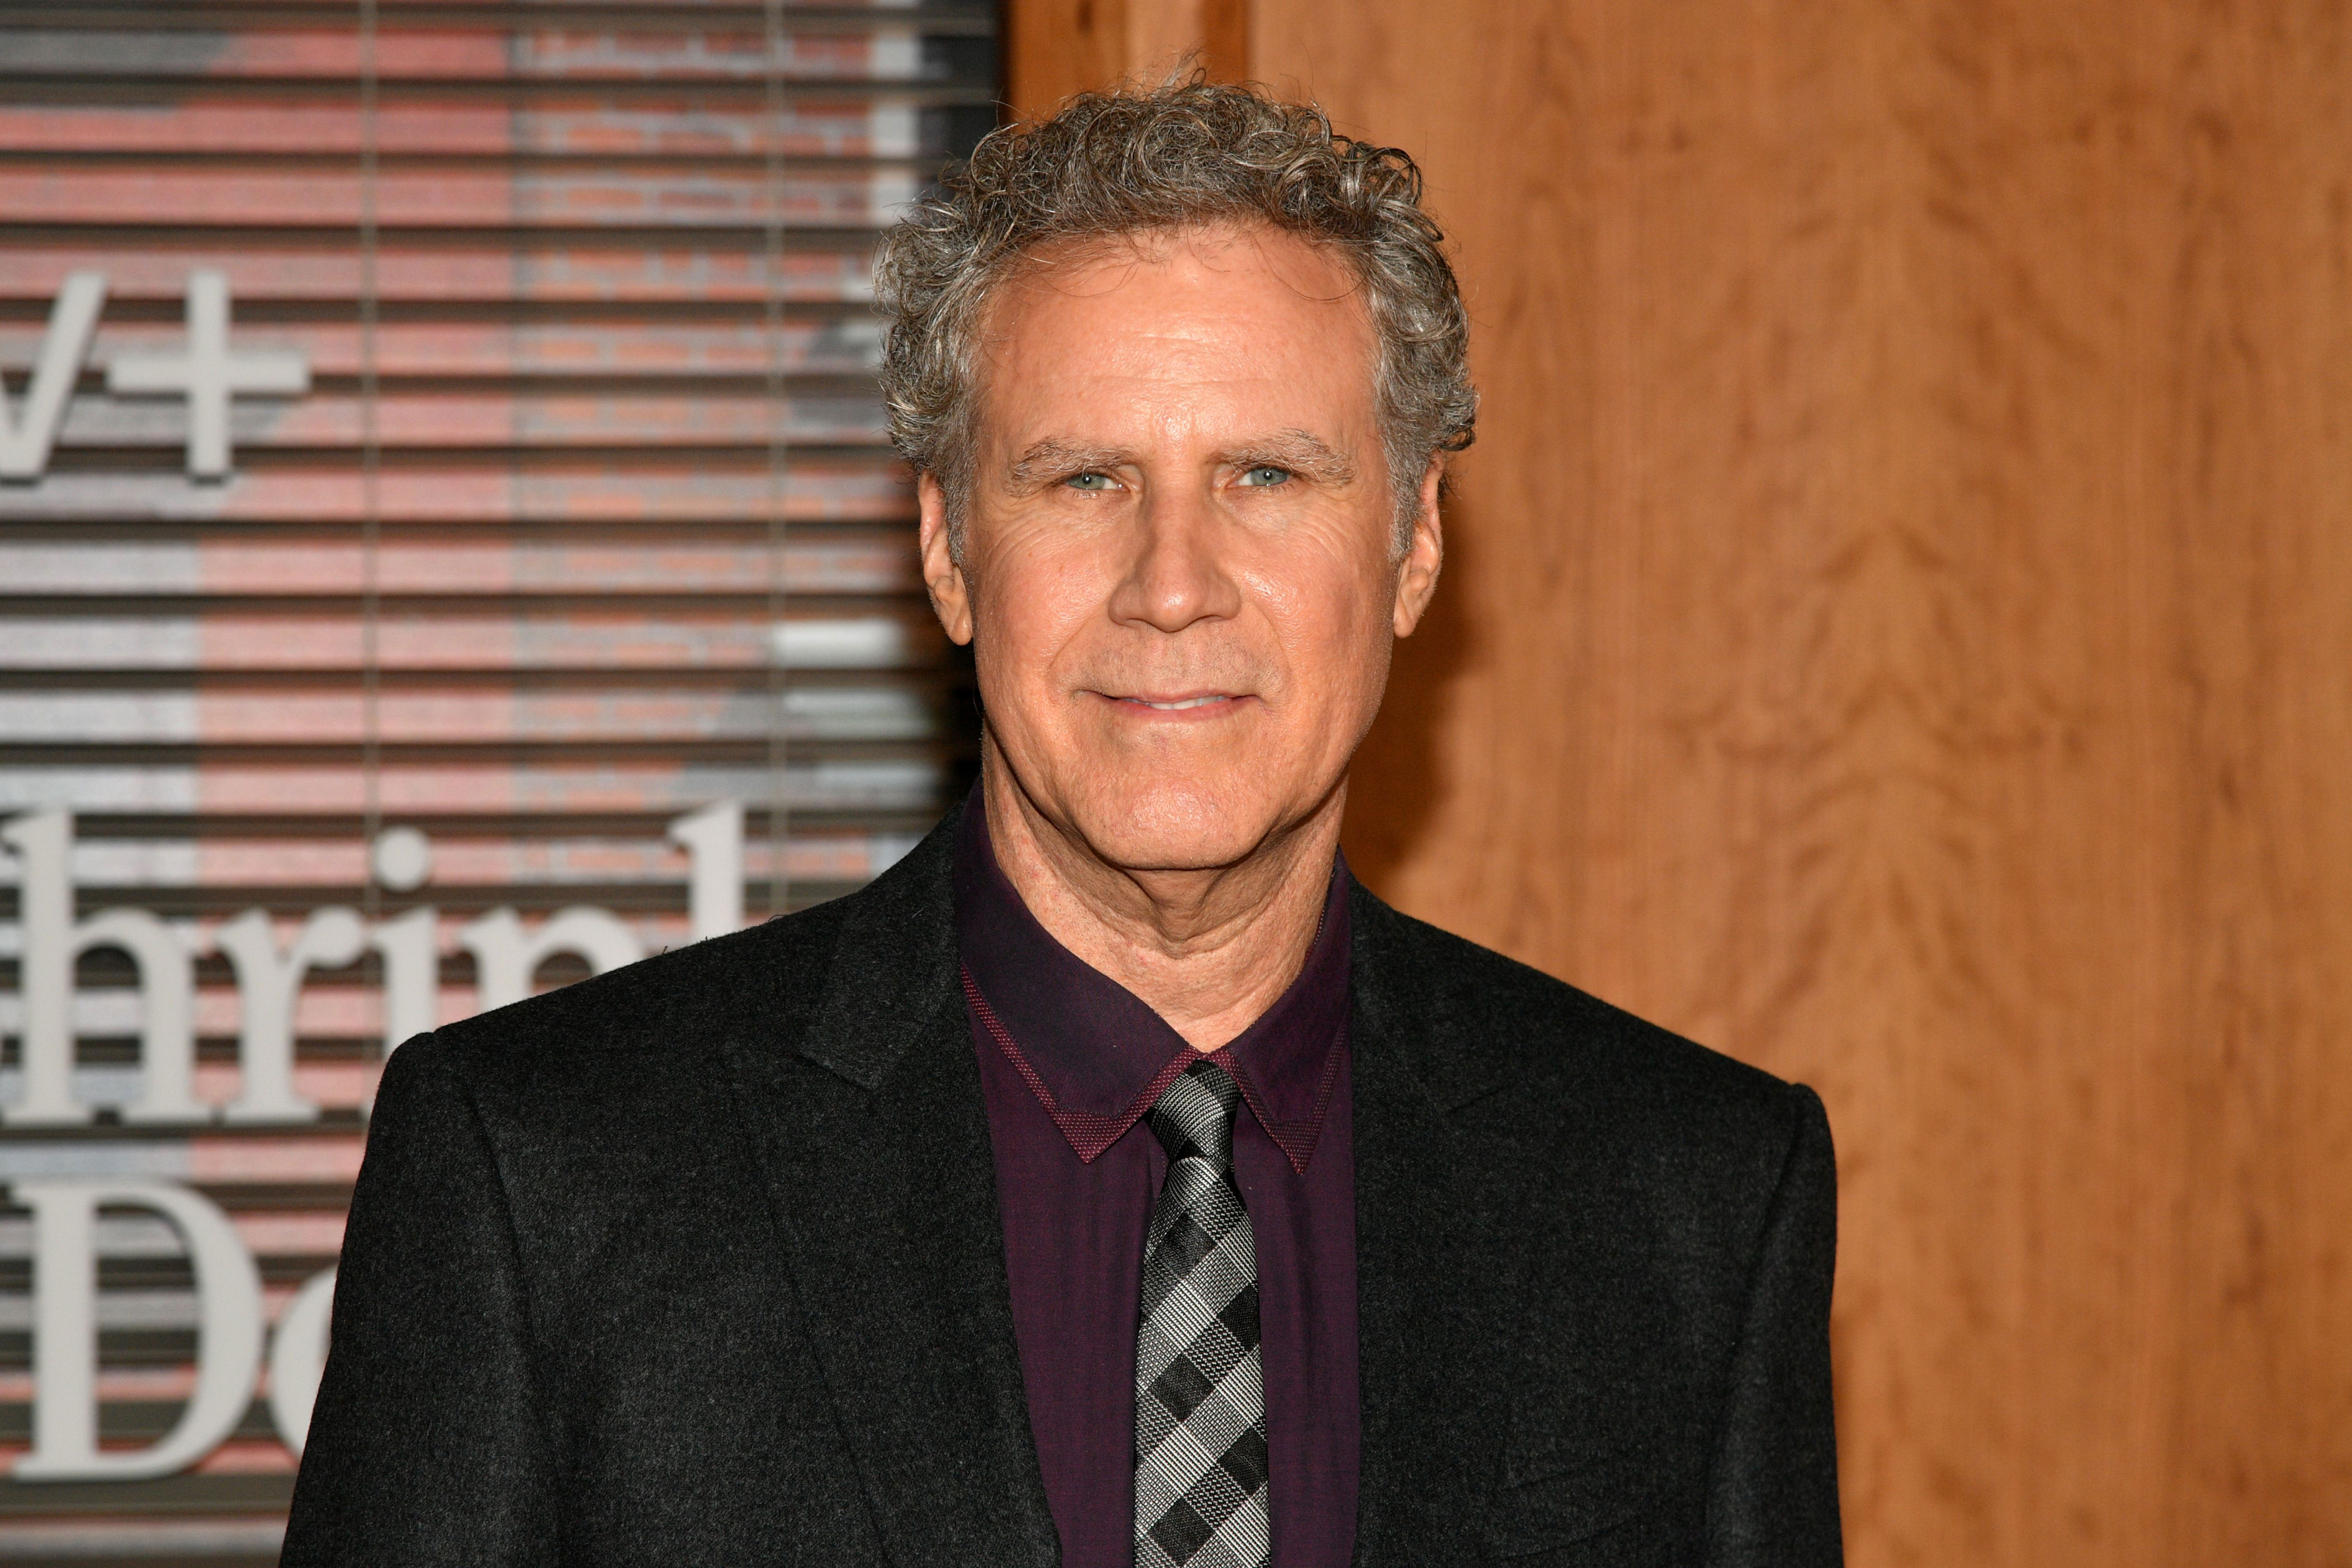 <p>Former "Saturday Night Live" star Will Ferrell has starred in some of Hollywood's most hilarious and iconic movies. He's also starred in some of its biggest flops. </p><p>Join us as we rank Will's big-screen performances from the worst to the best. </p><p>Keep reading to get started...</p><p>MORE: <a href="https://www.msn.com/en-us/community/channel/vid-kwt2e0544658wubk9hsb0rpvnfkttmu3tuj7uq3i4wuywgbakeva?item=flights%3Aprg-tipsubsc-v1a&ocid=social-peregrine&cvid=333aa5de5a654aa7a98a6930005e8f60&ei=2">Follow Wonderwall on MSN for more fun celebrity & entertainment photo galleries and content</a></p>